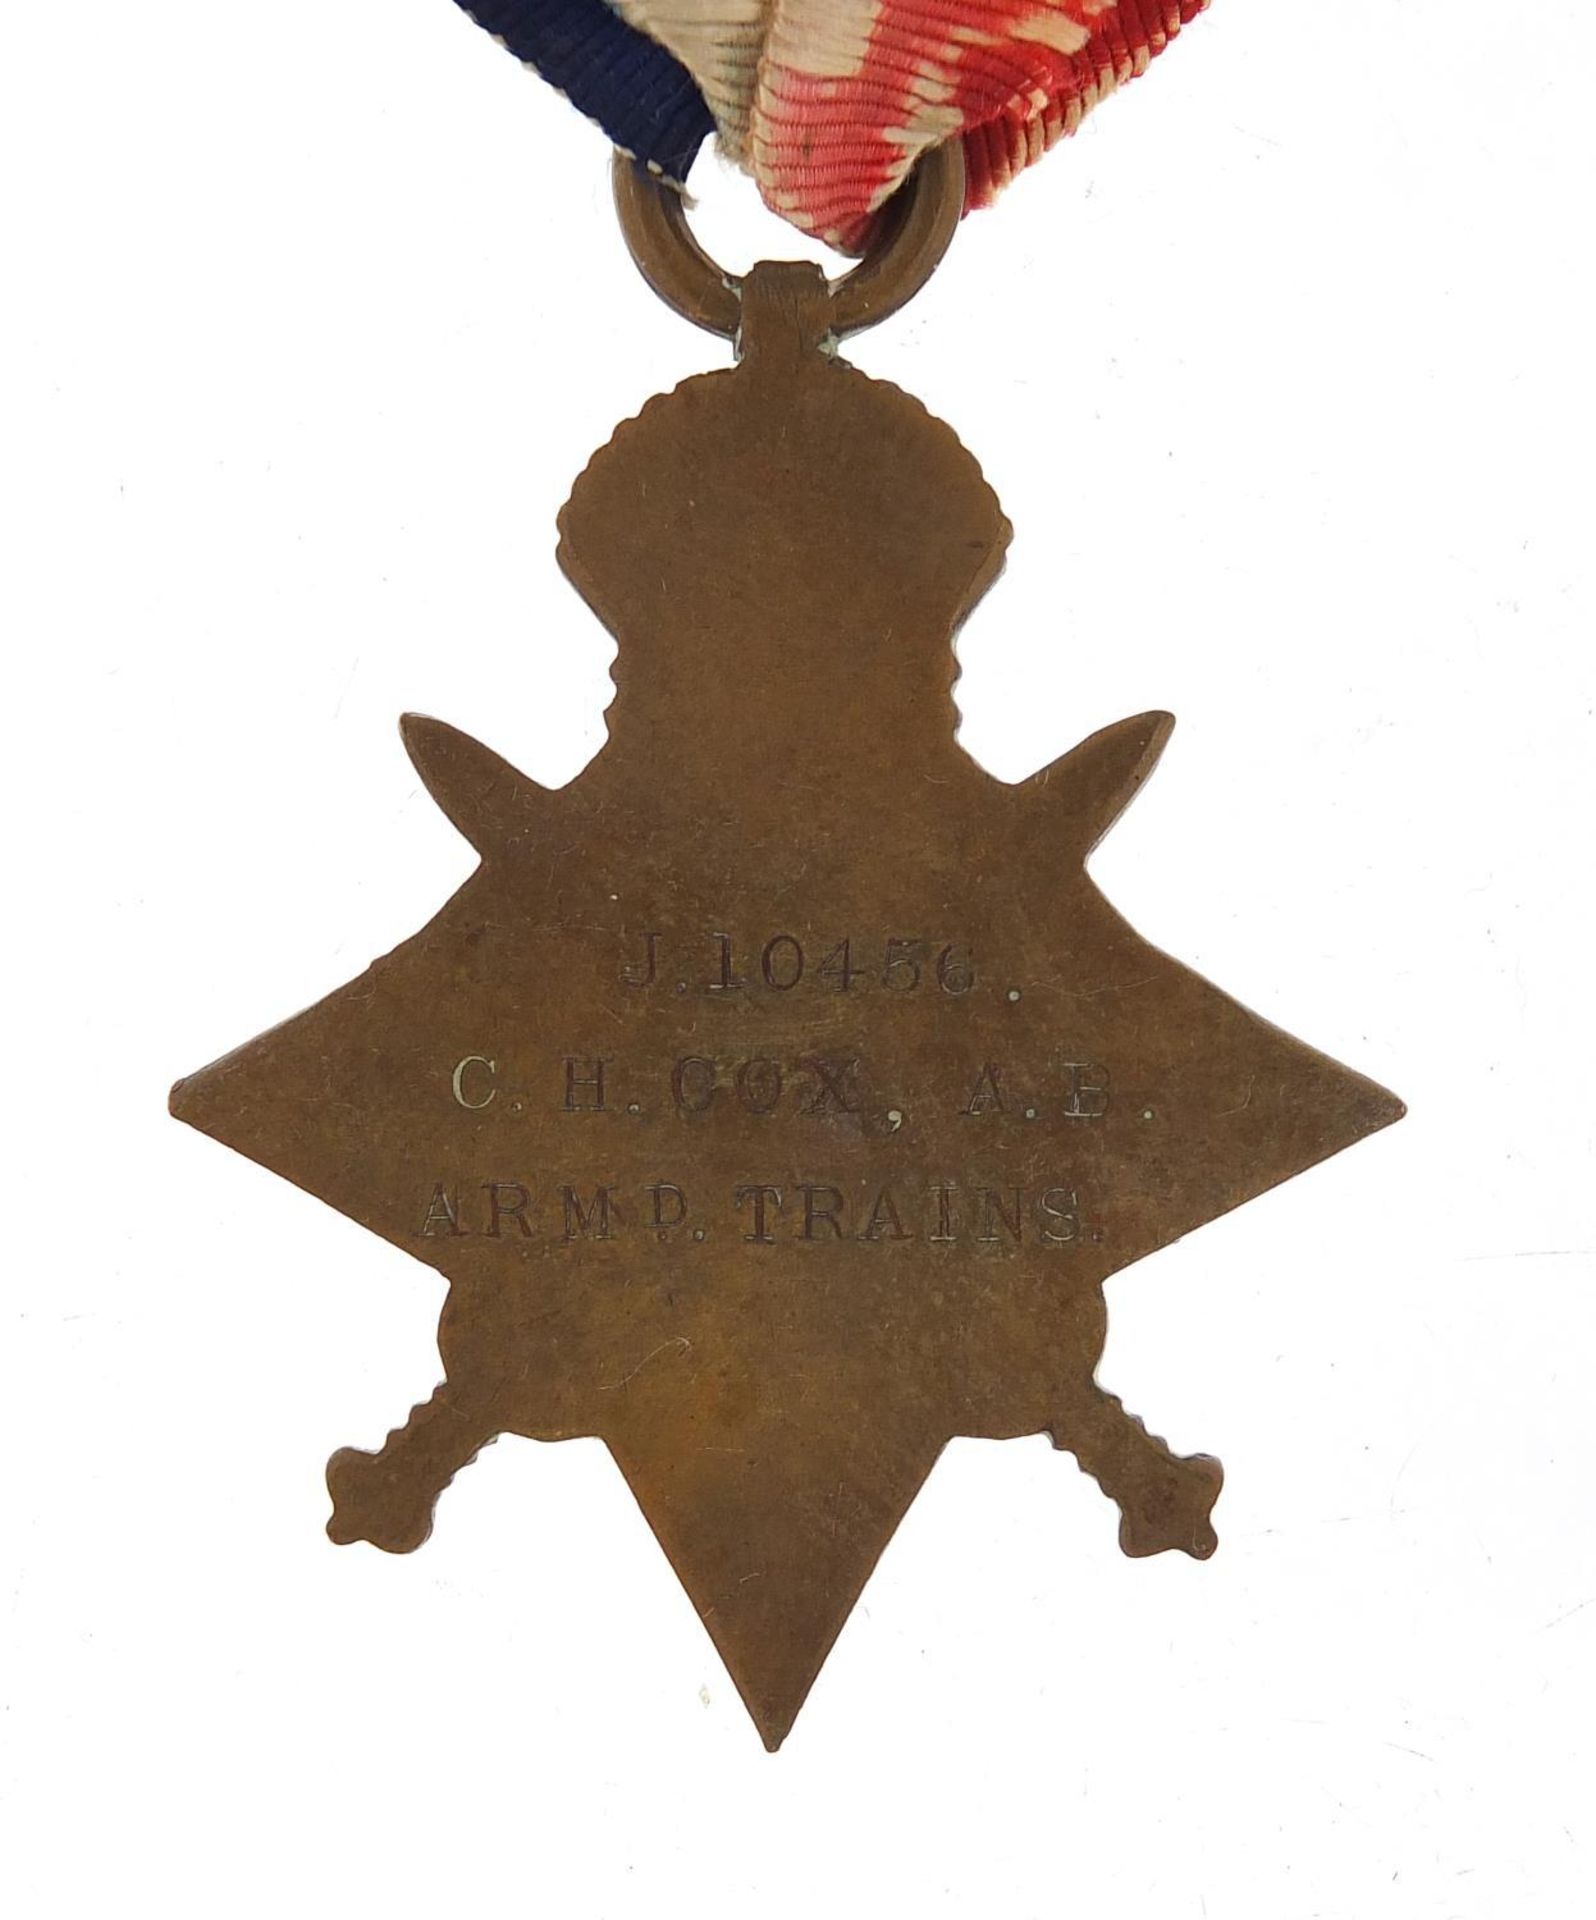 British military World War I Mons Star awarded to J.10456.C.H.COX,A.B.ARMD.TRAINS - Image 2 of 2